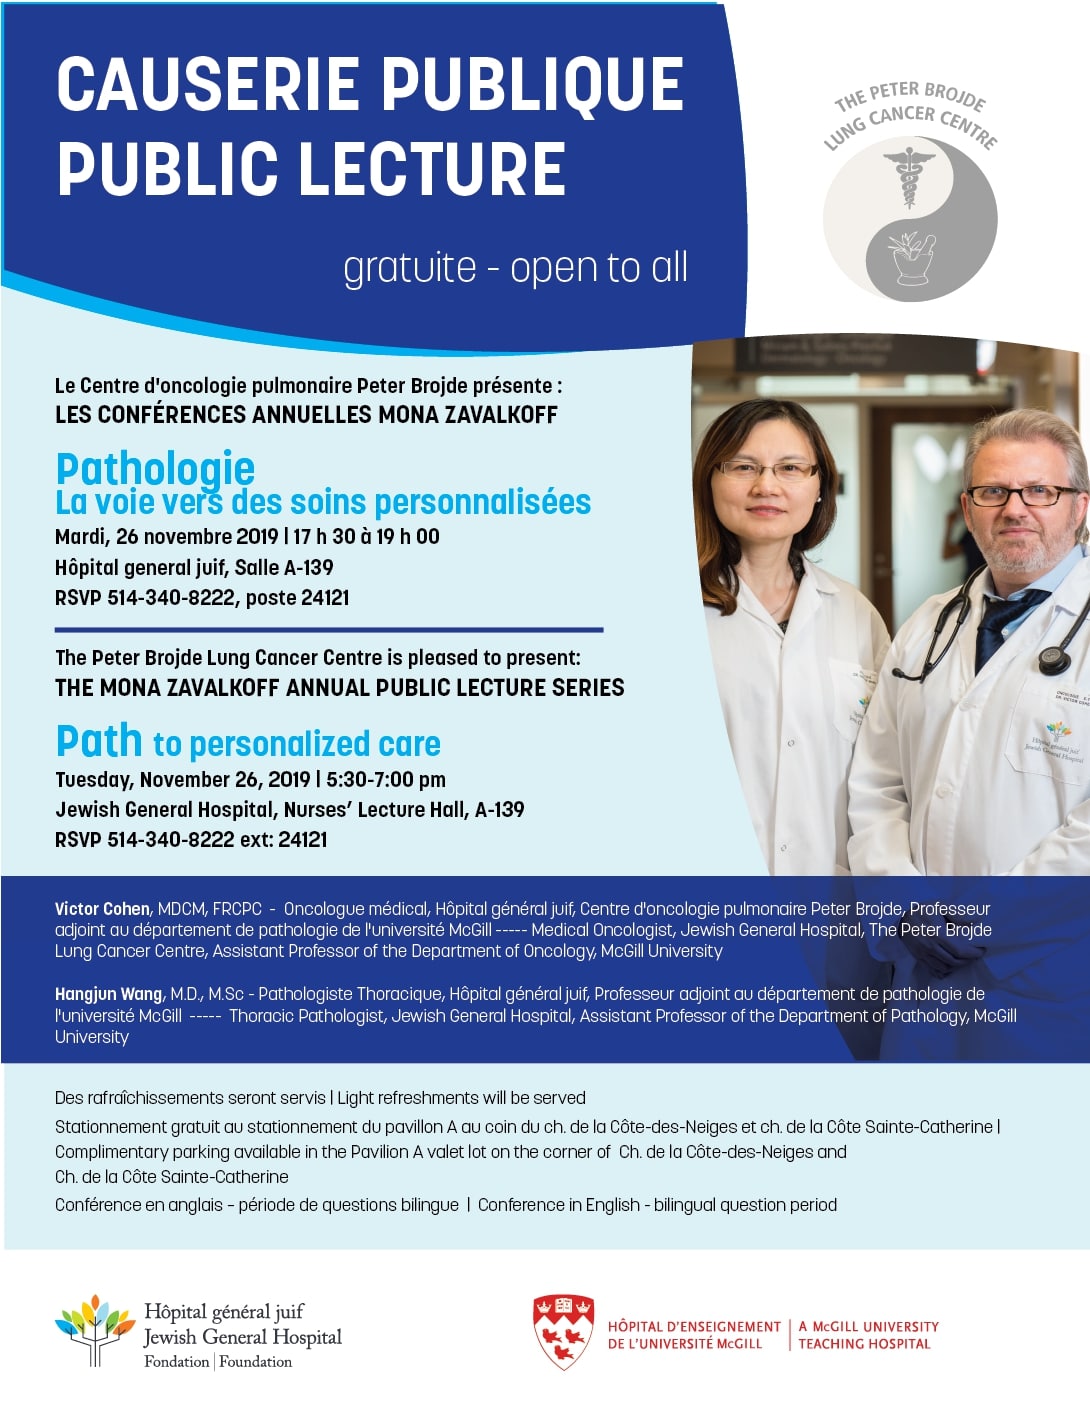 The Mona Zavalkoff Annual Public Lecture Series on Lung Cancer - image